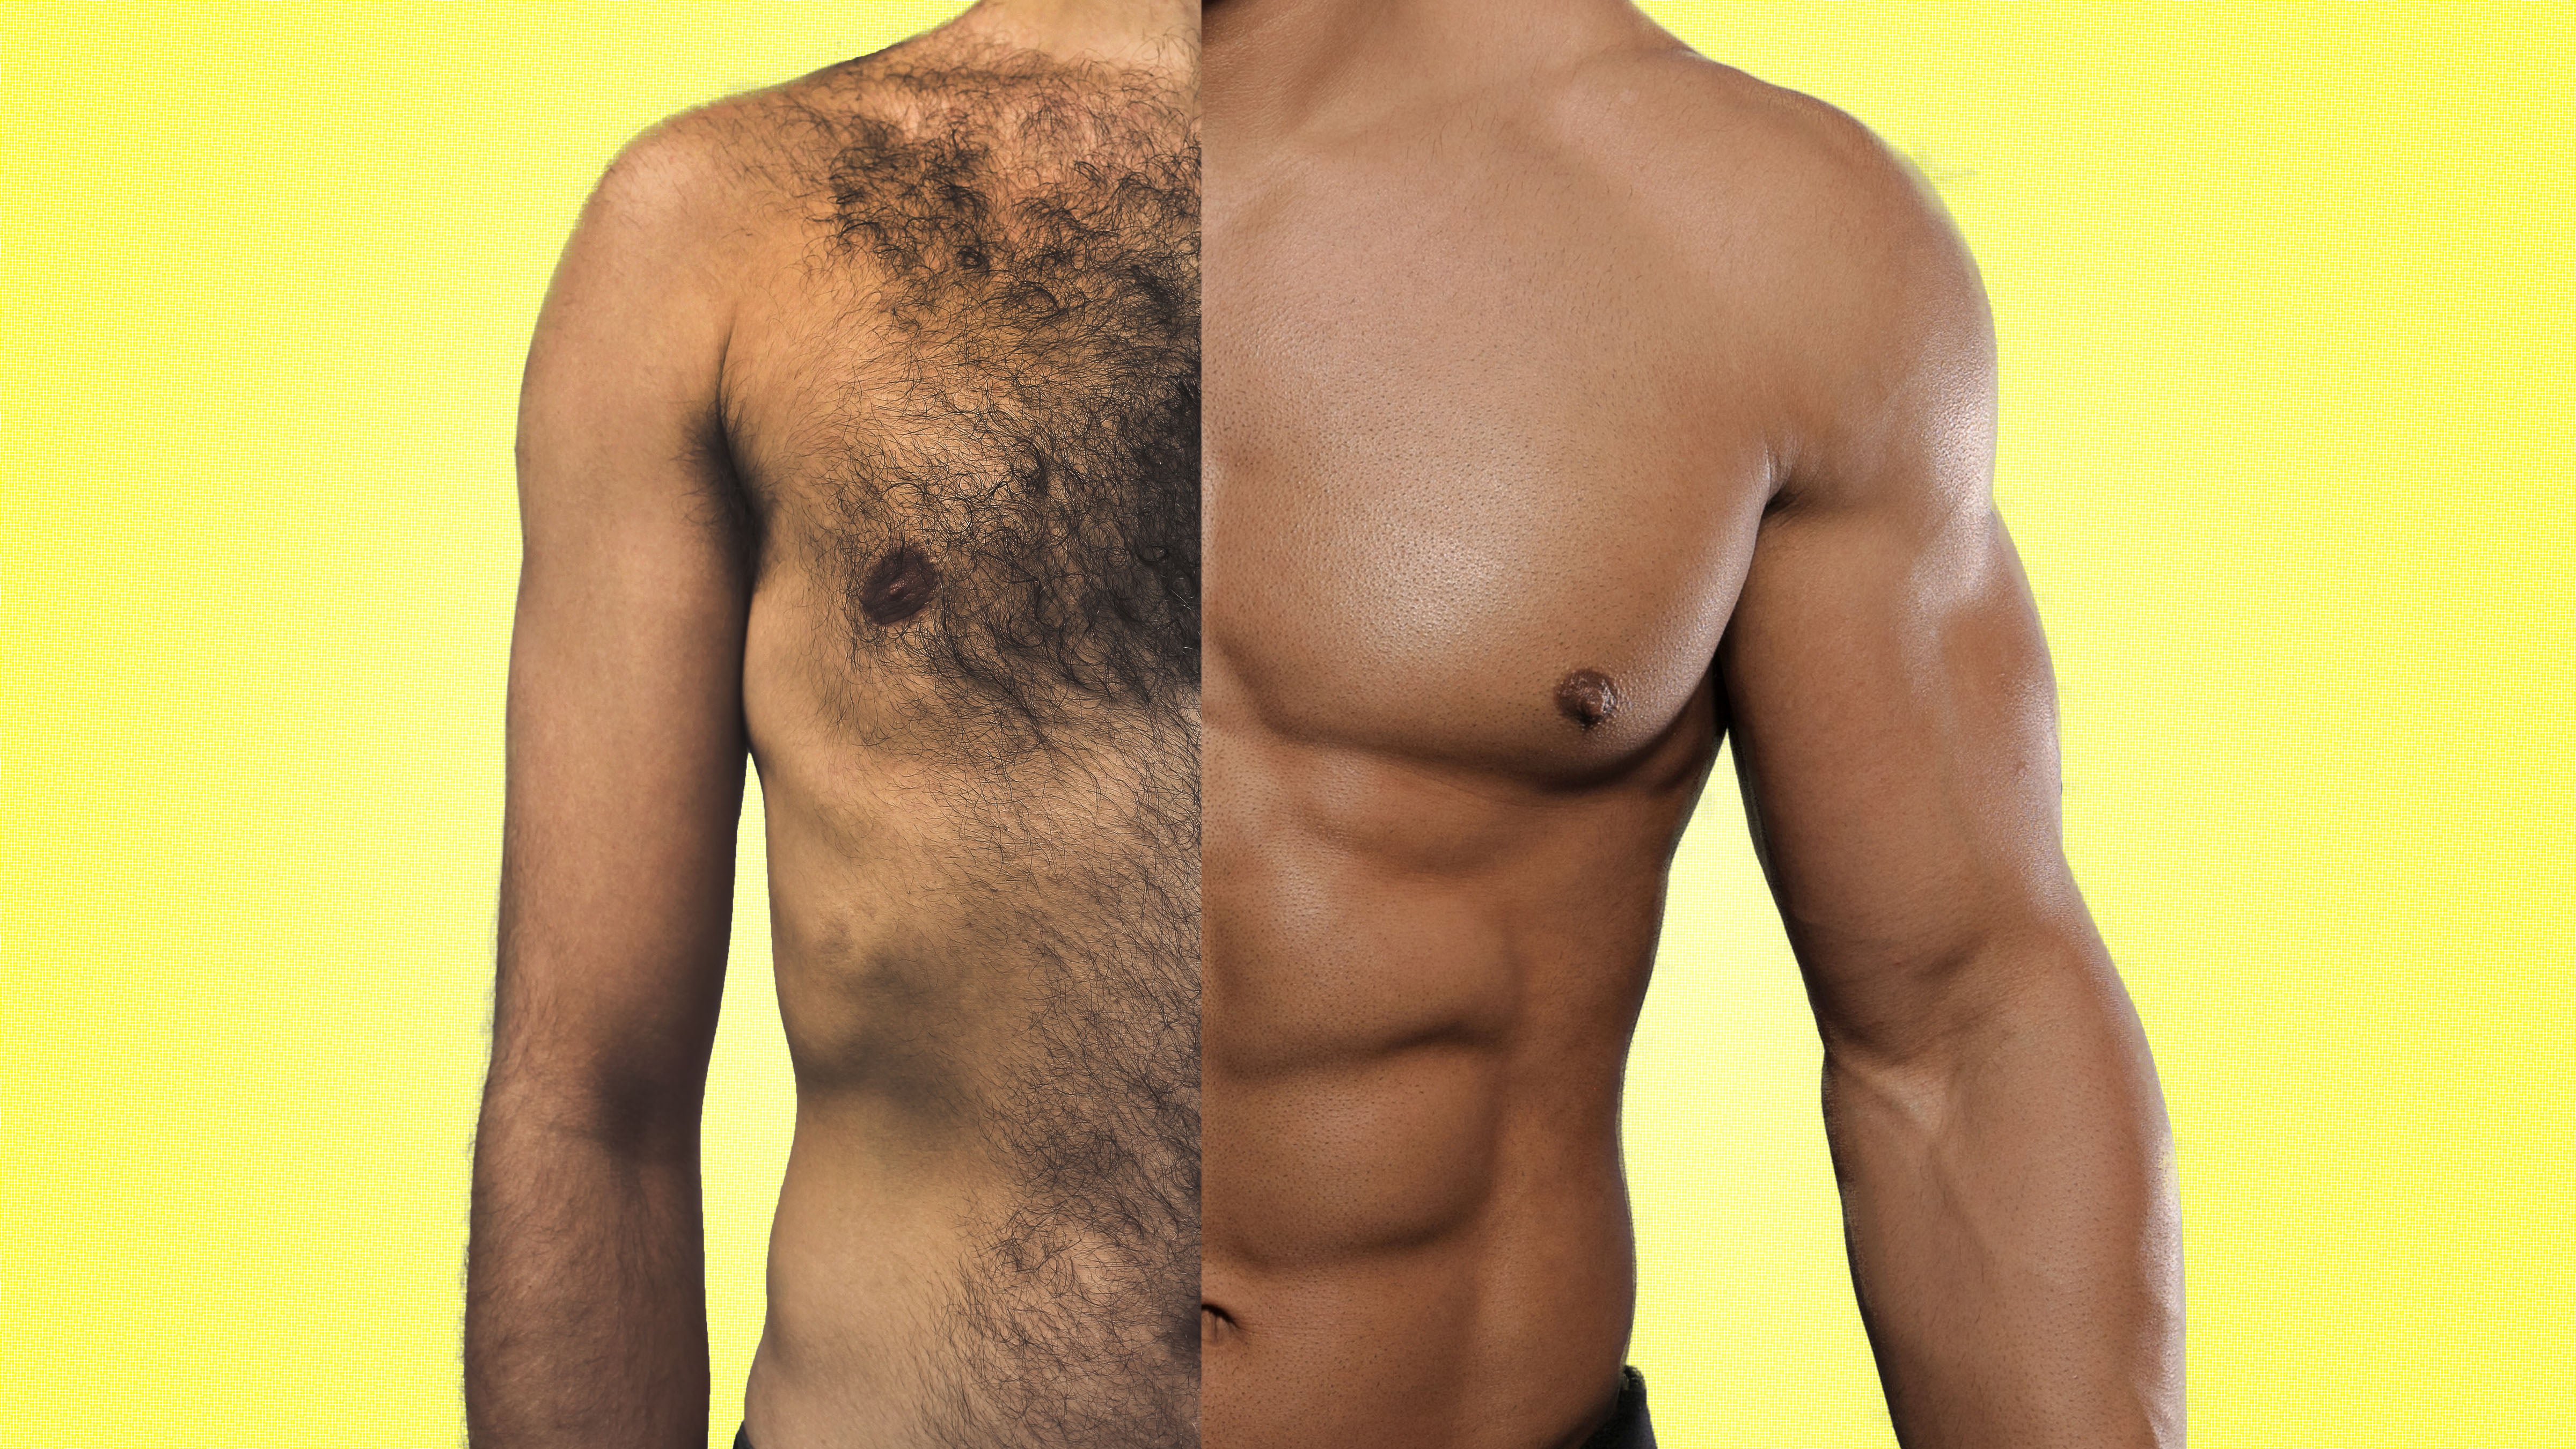 Does Shaving Chest Hair Make It Grow Faster?